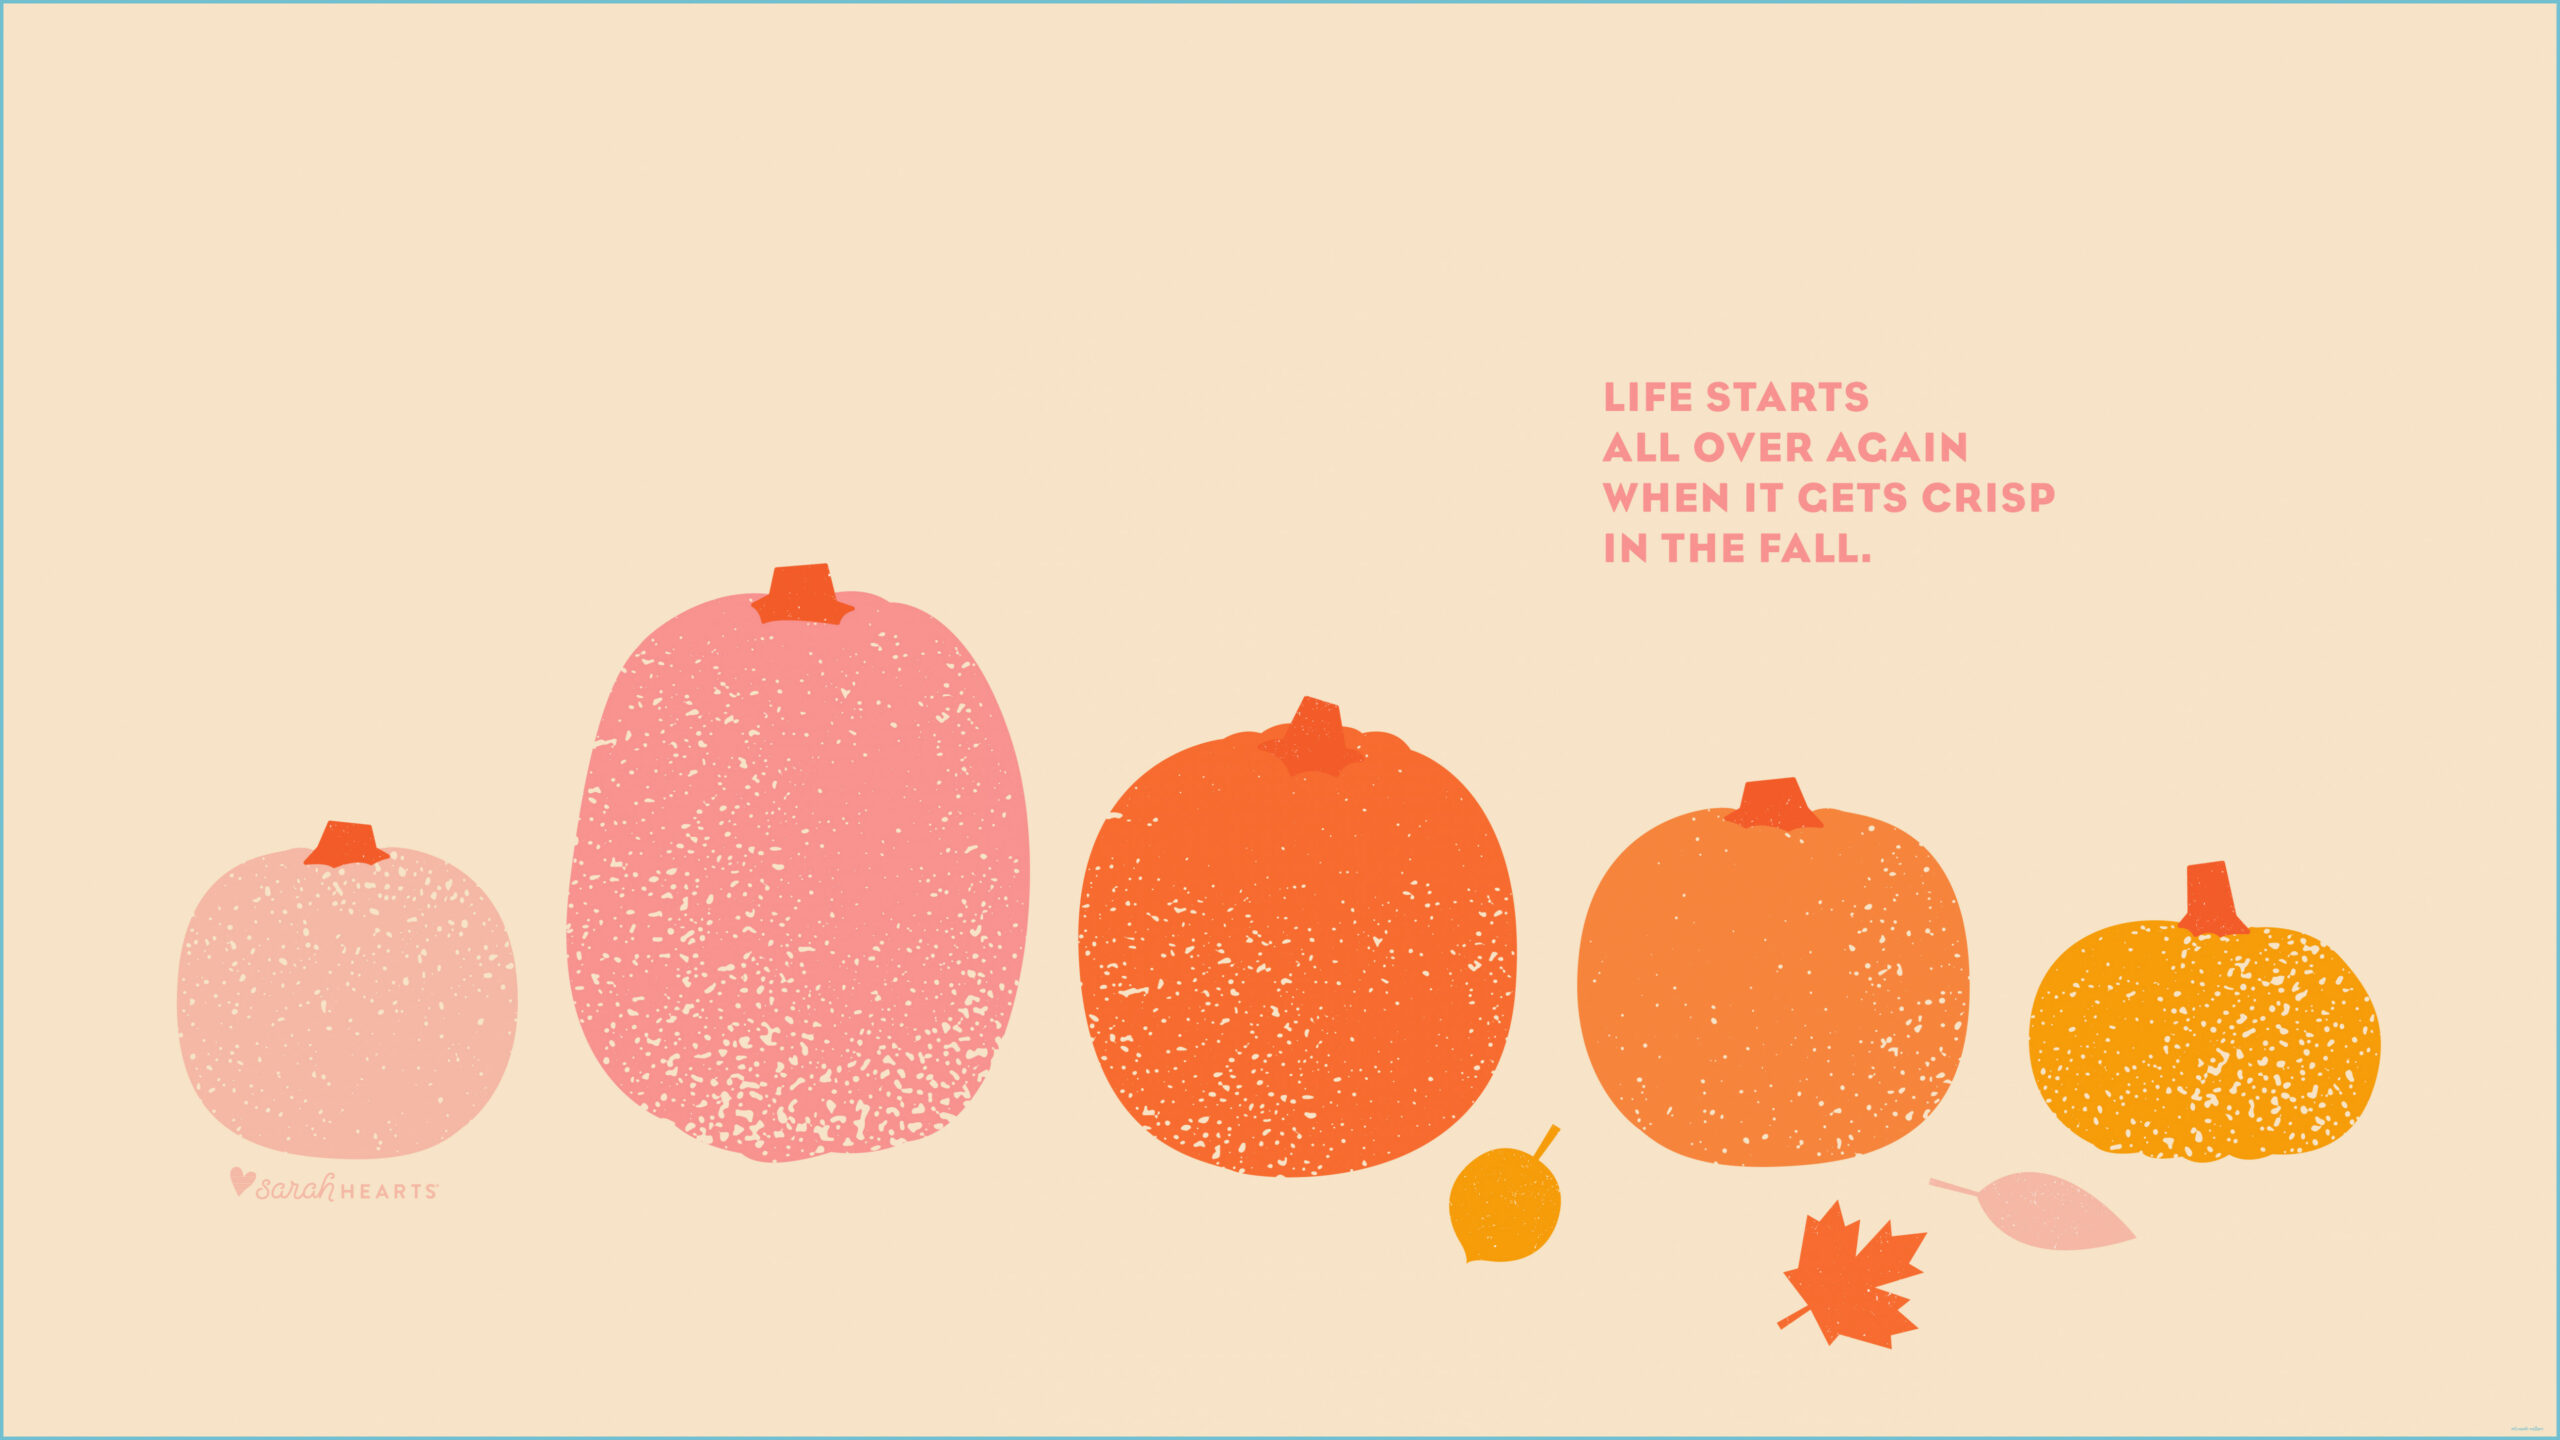 I Will Tell You The Truth About Cute Pumpkin Wallpaper In The Next 10 Seconds. Cute Pumpkin Wallpaper